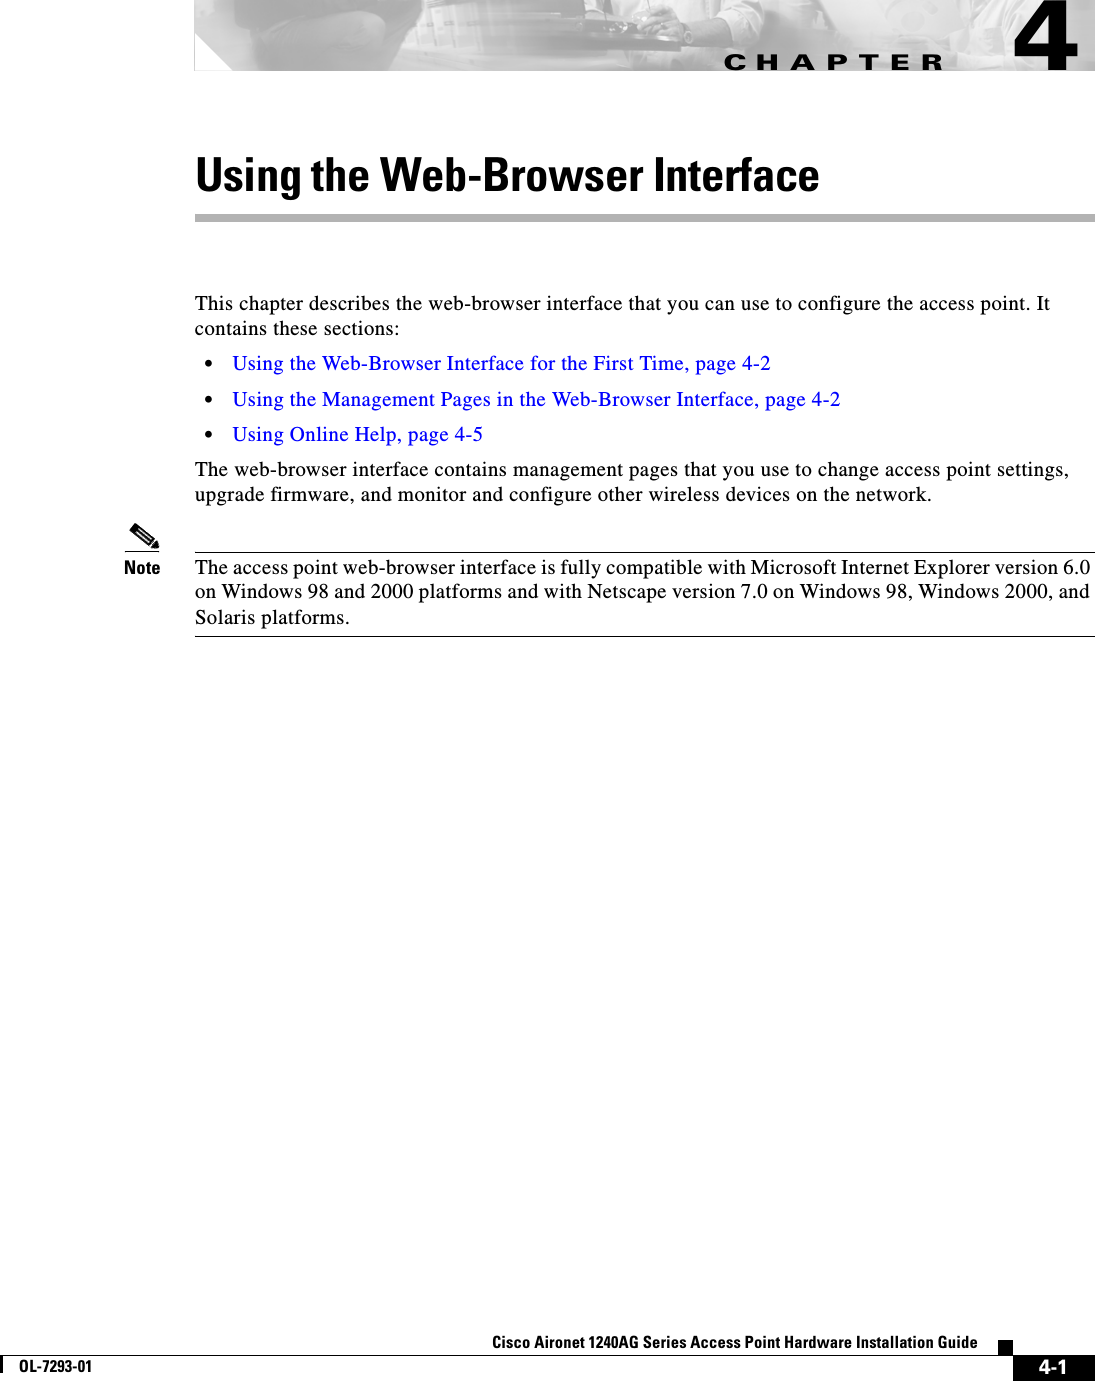 CHAPTER 4-1Cisco Aironet 1240AG Series Access Point Hardware Installation GuideOL-7293-014Using the Web-Browser InterfaceThis chapter describes the web-browser interface that you can use to configure the access point. It contains these sections:•Using the Web-Browser Interface for the First Time, page 4-2•Using the Management Pages in the Web-Browser Interface, page 4-2•Using Online Help, page 4-5The web-browser interface contains management pages that you use to change access point settings, upgrade firmware, and monitor and configure other wireless devices on the network.Note The access point web-browser interface is fully compatible with Microsoft Internet Explorer version 6.0 on Windows 98 and 2000 platforms and with Netscape version 7.0 on Windows 98, Windows 2000, and Solaris platforms.